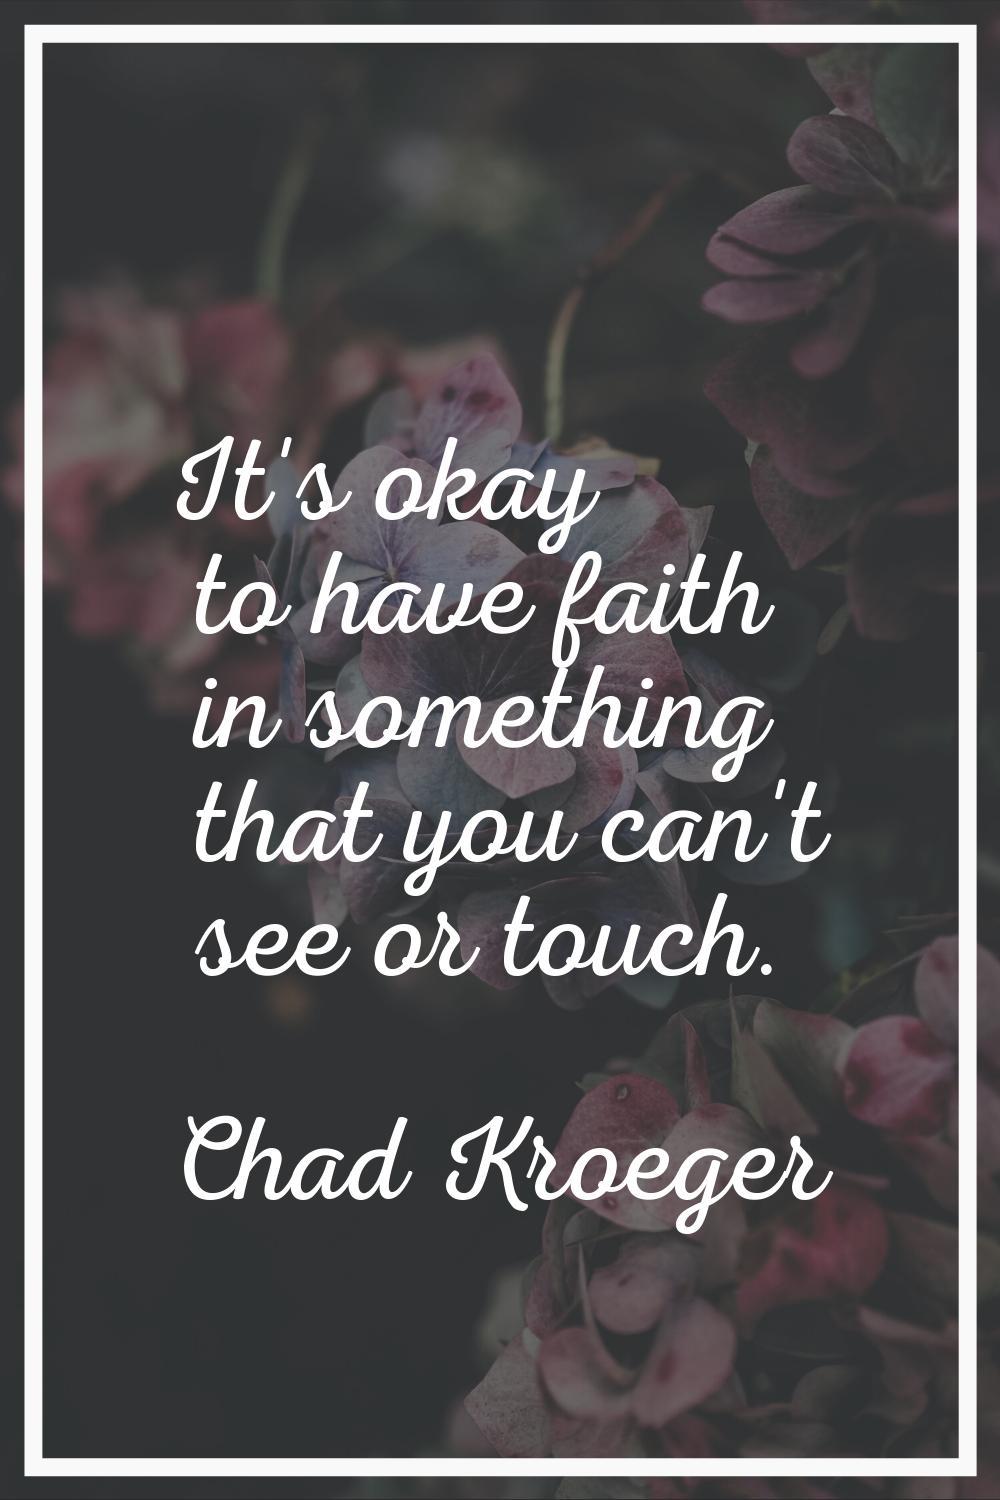 It's okay to have faith in something that you can't see or touch.